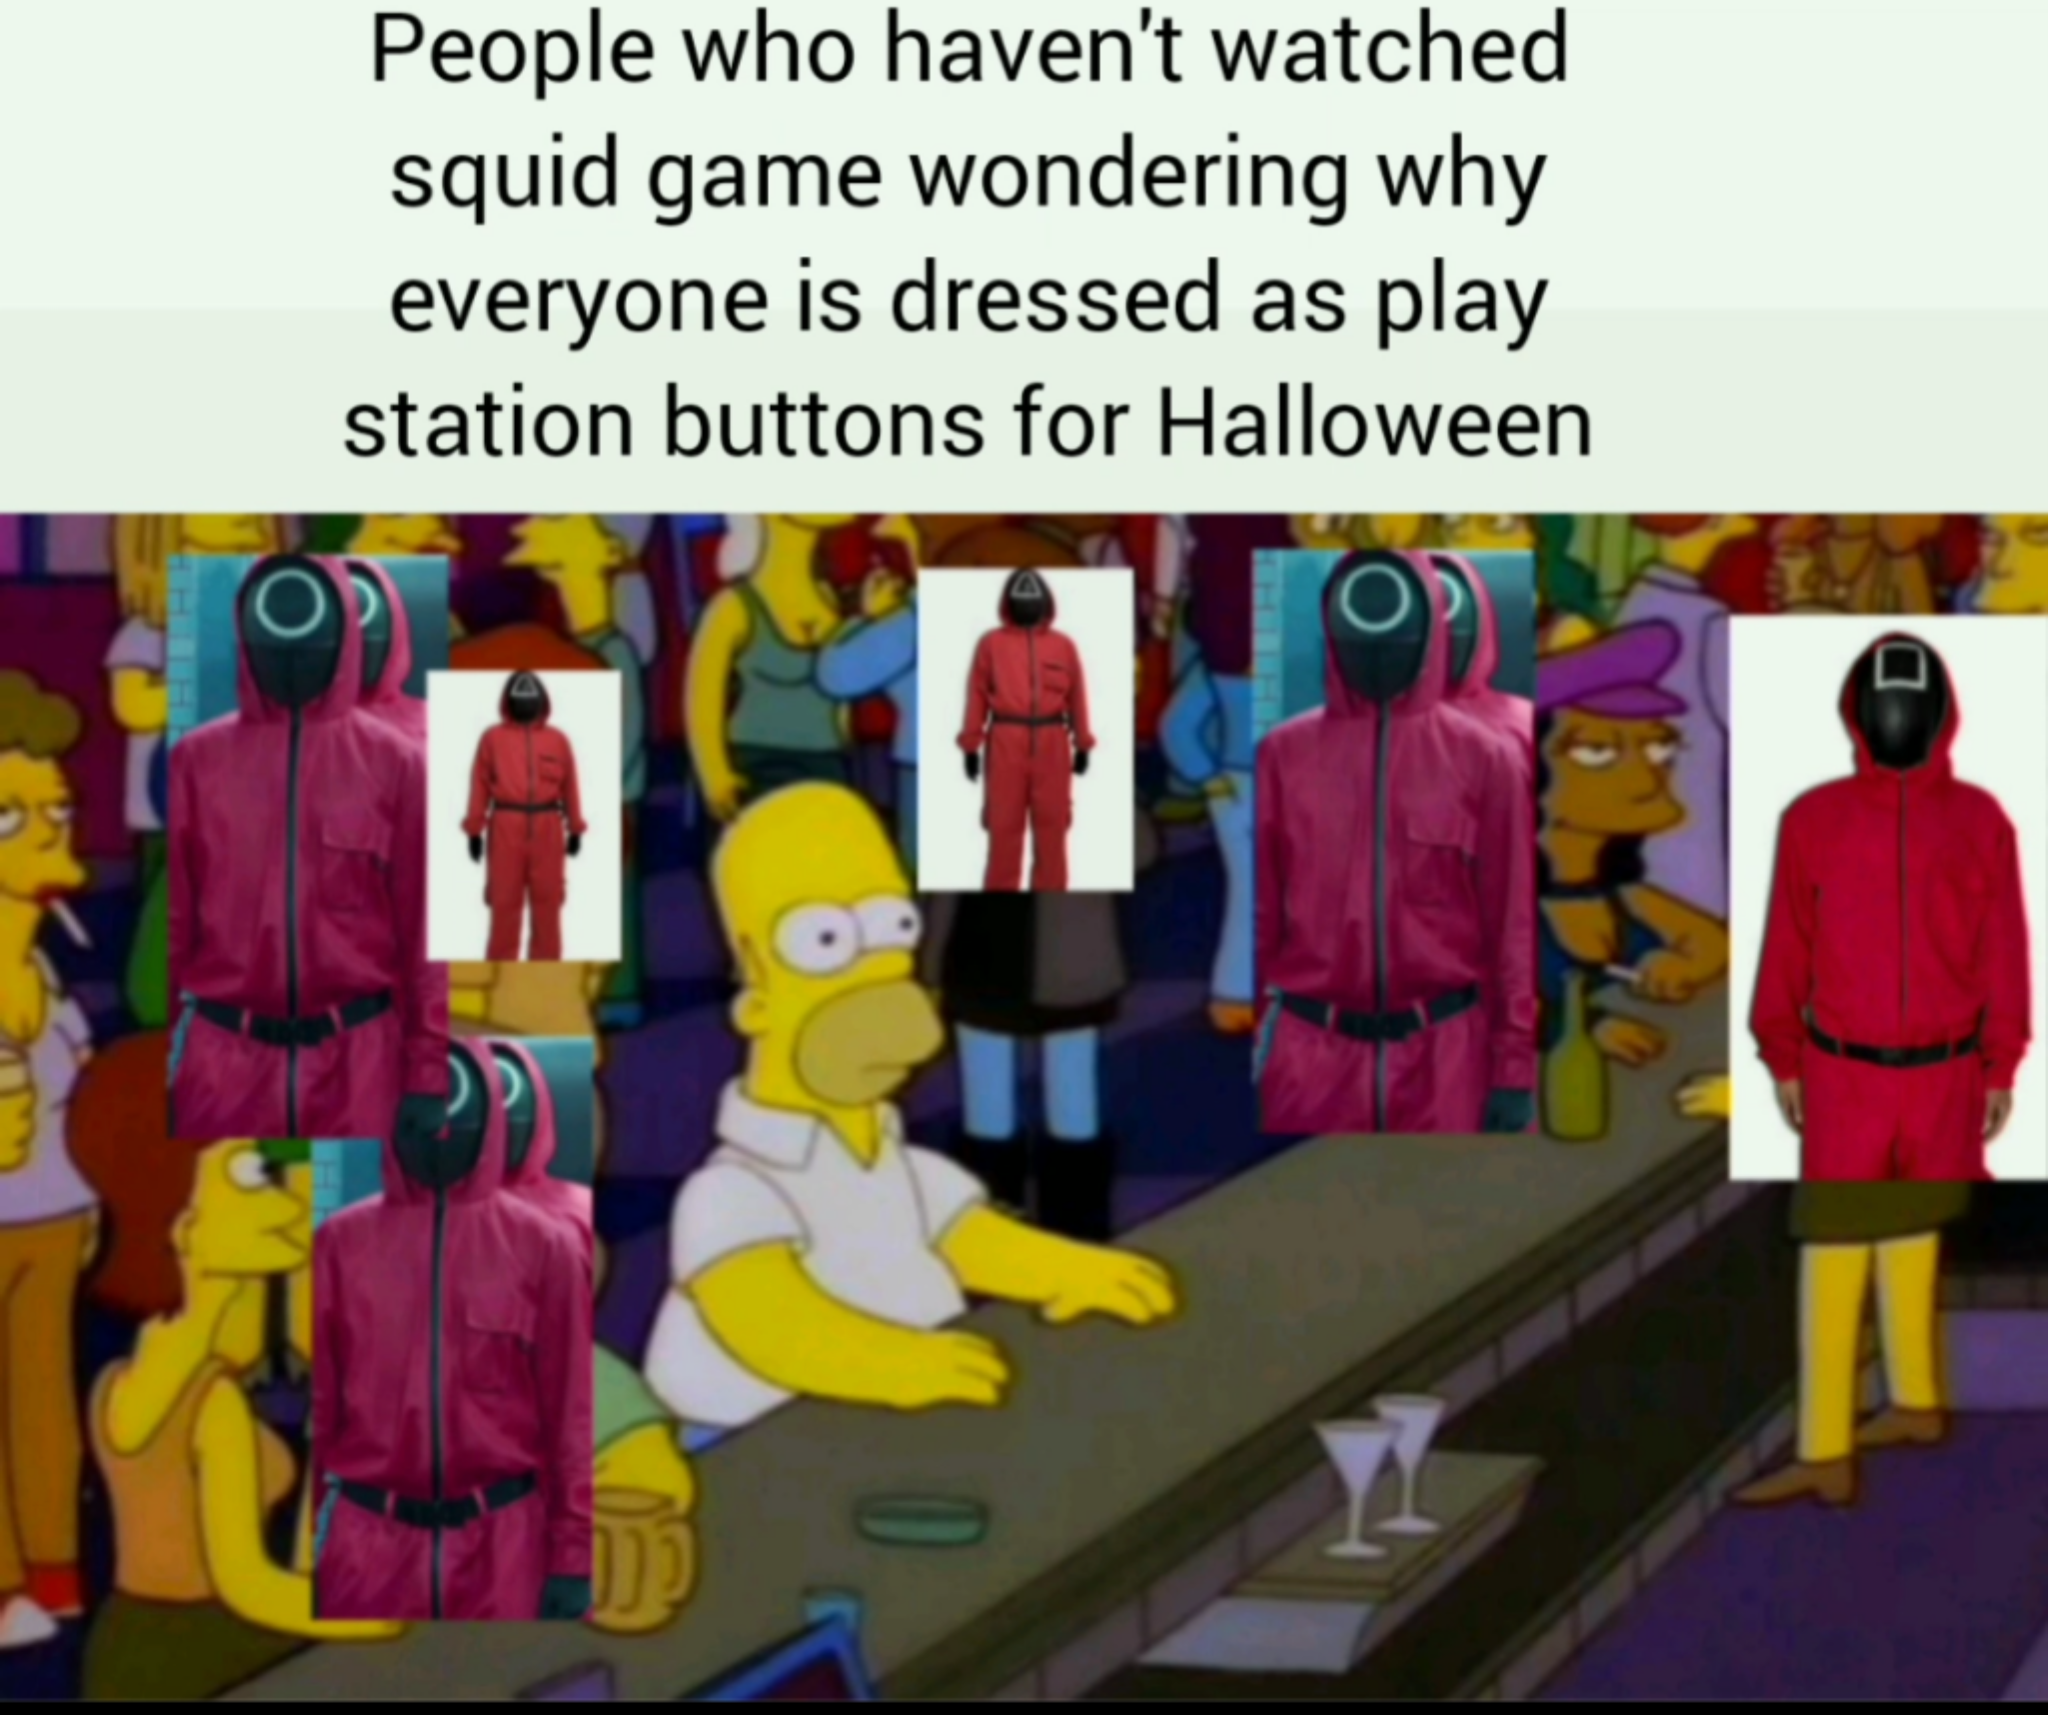 gaming memes - people who havent watched squid game - People who haven't watched squid game wondering why everyone is dressed as play station buttons for Halloween St